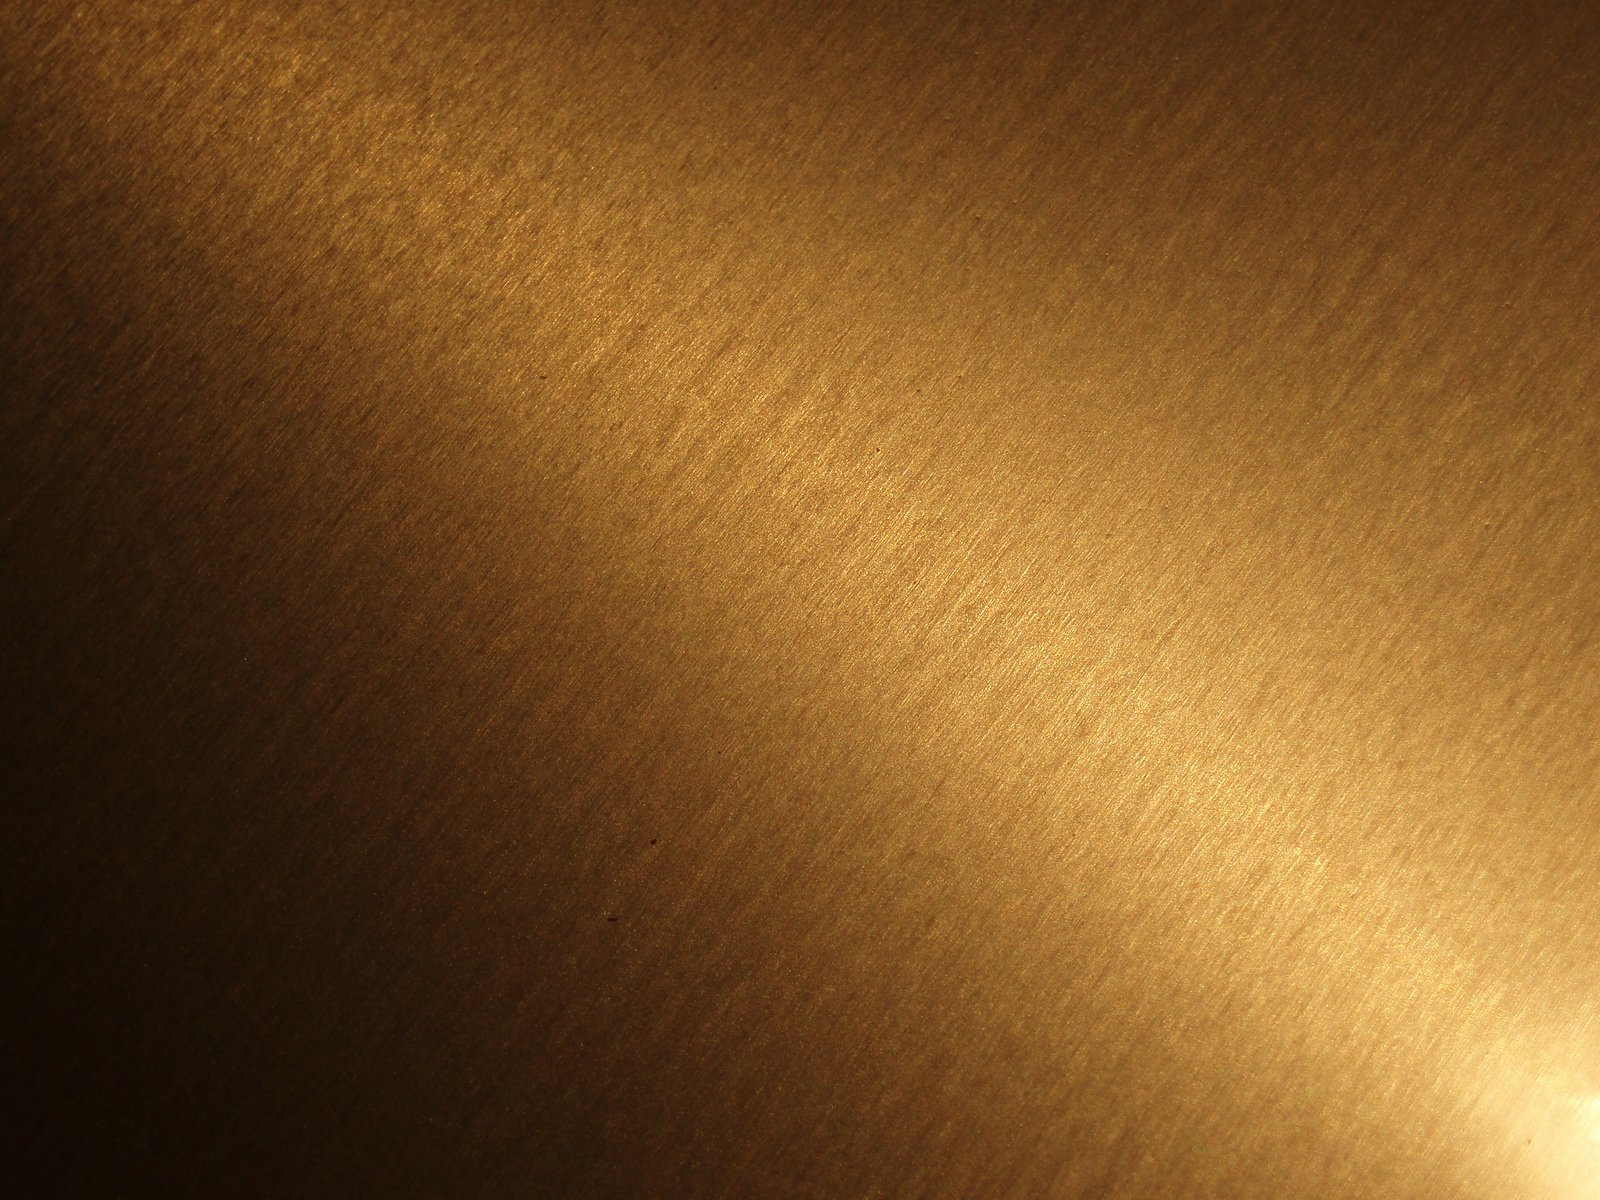 a metal surface in a metallic colored texture